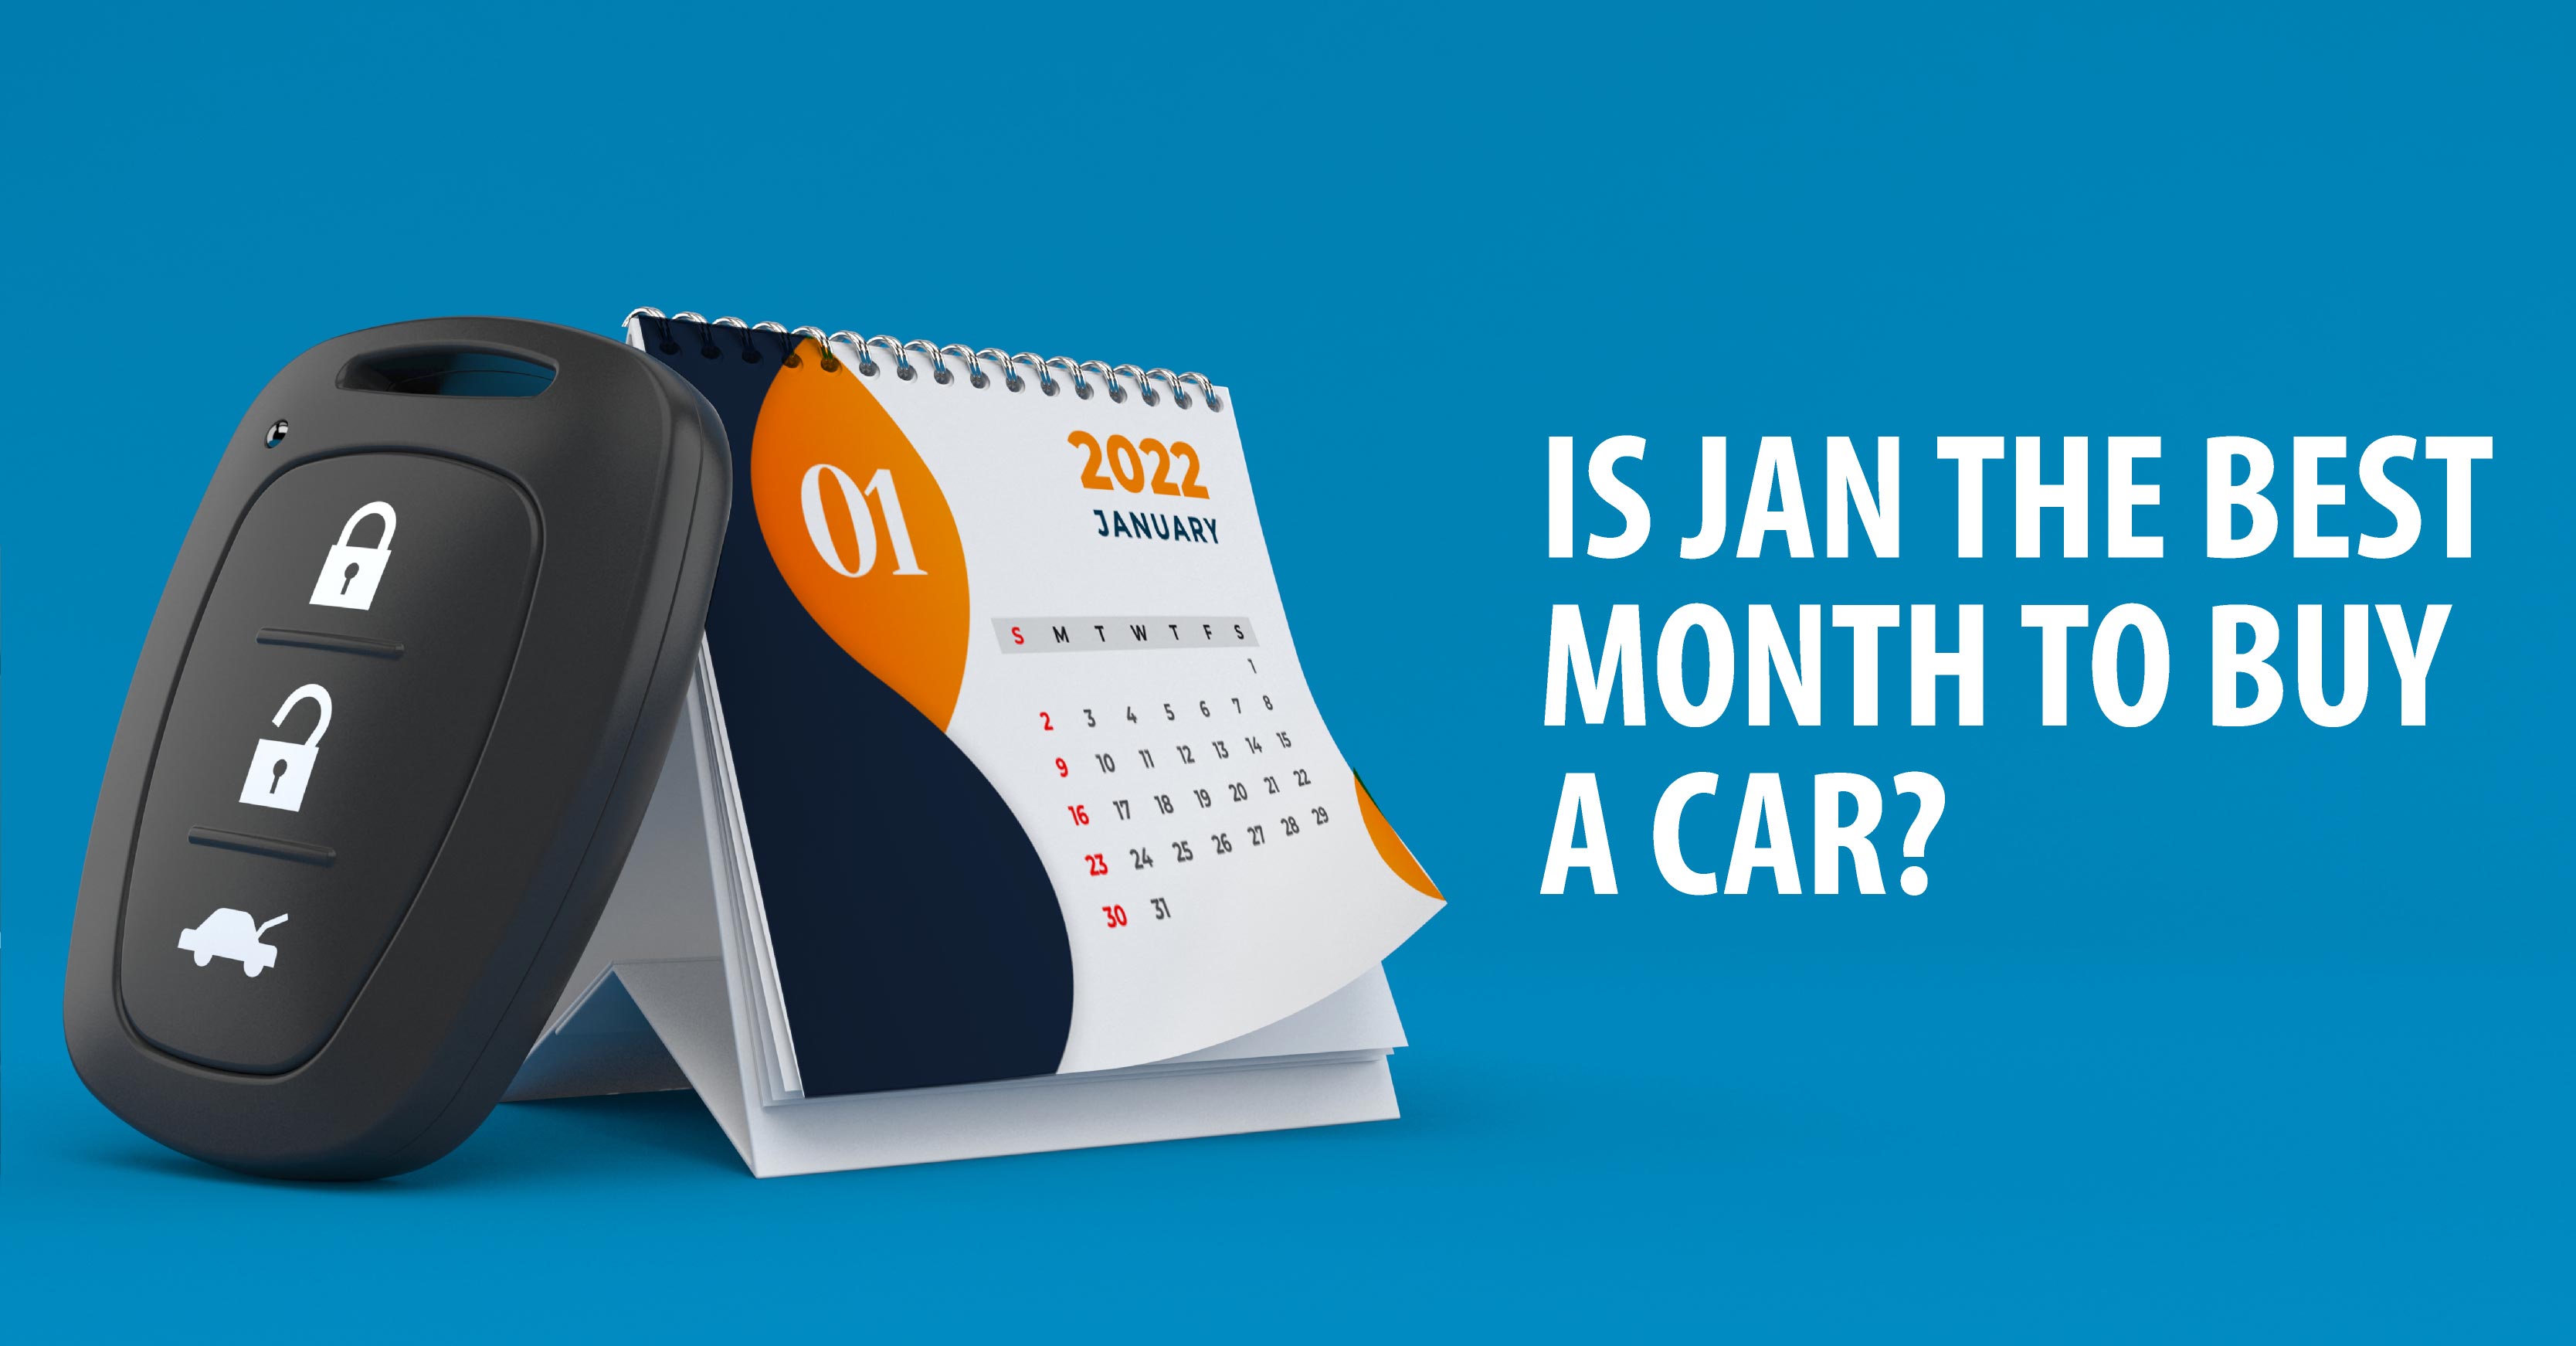 IS JANUARY THE BEST MONTH TO BUY A CAR?